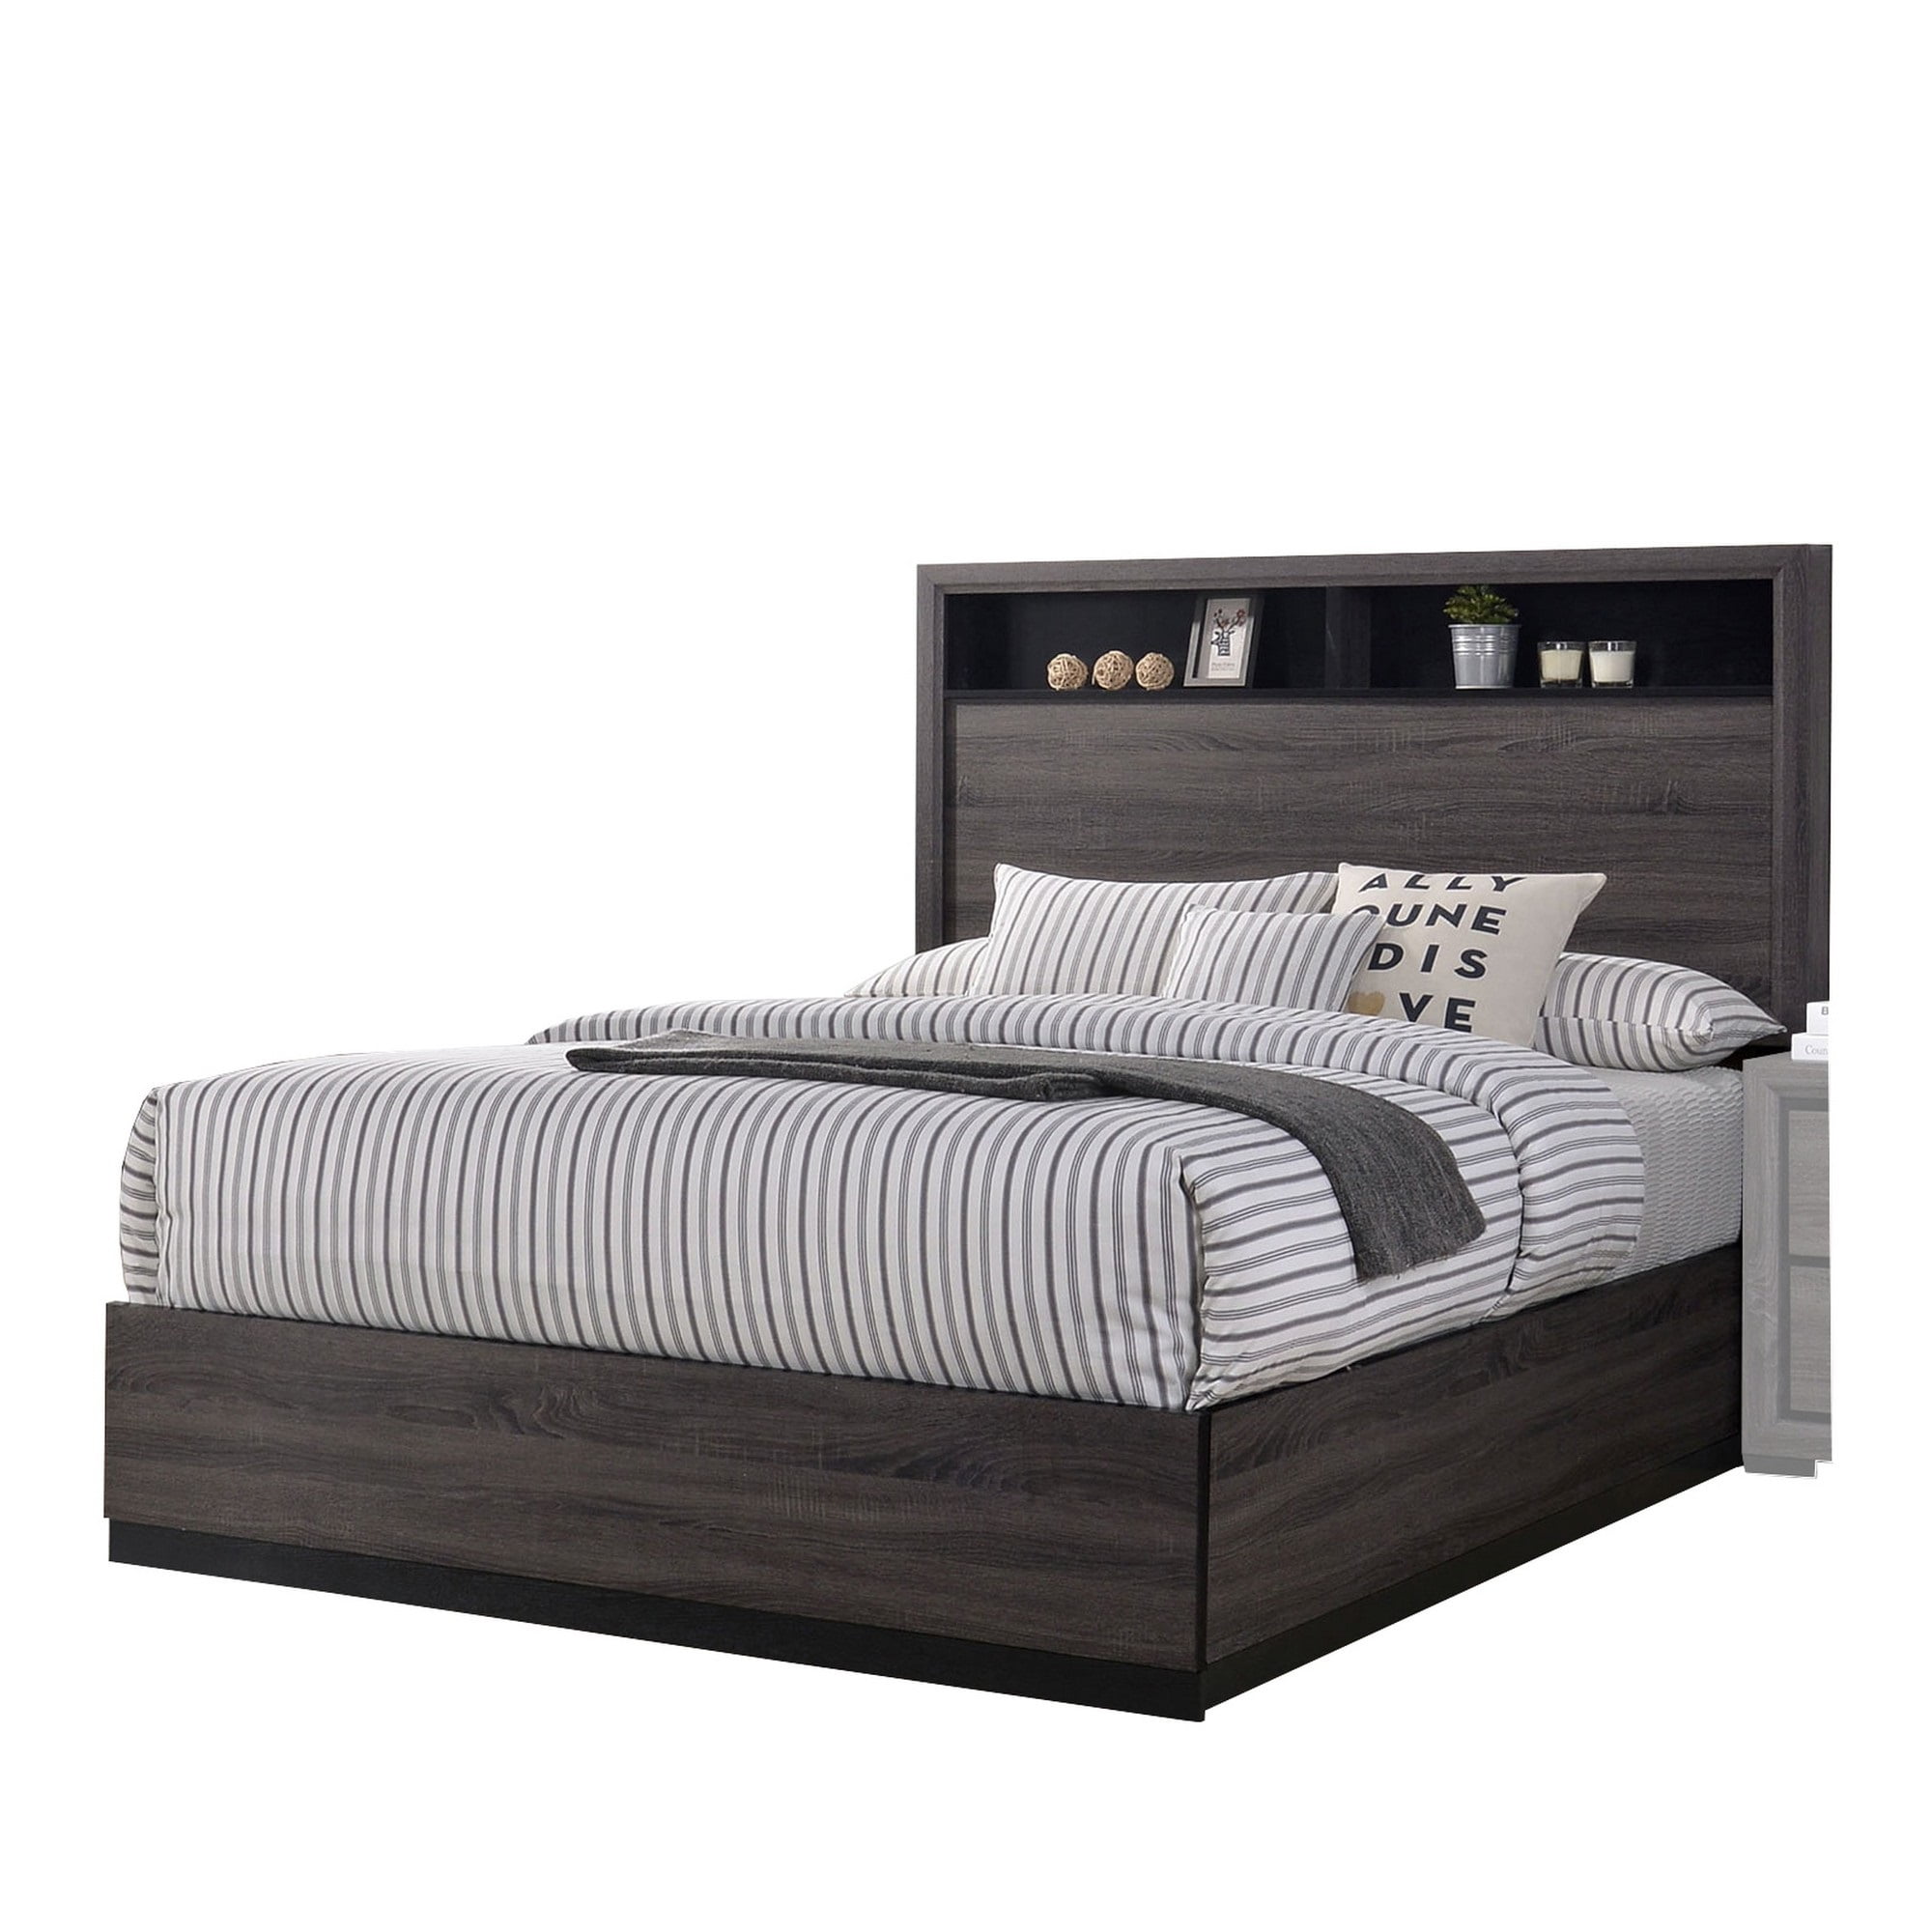 Transitional Wooden Queen Size Platform Bed with Bookcase Headboard